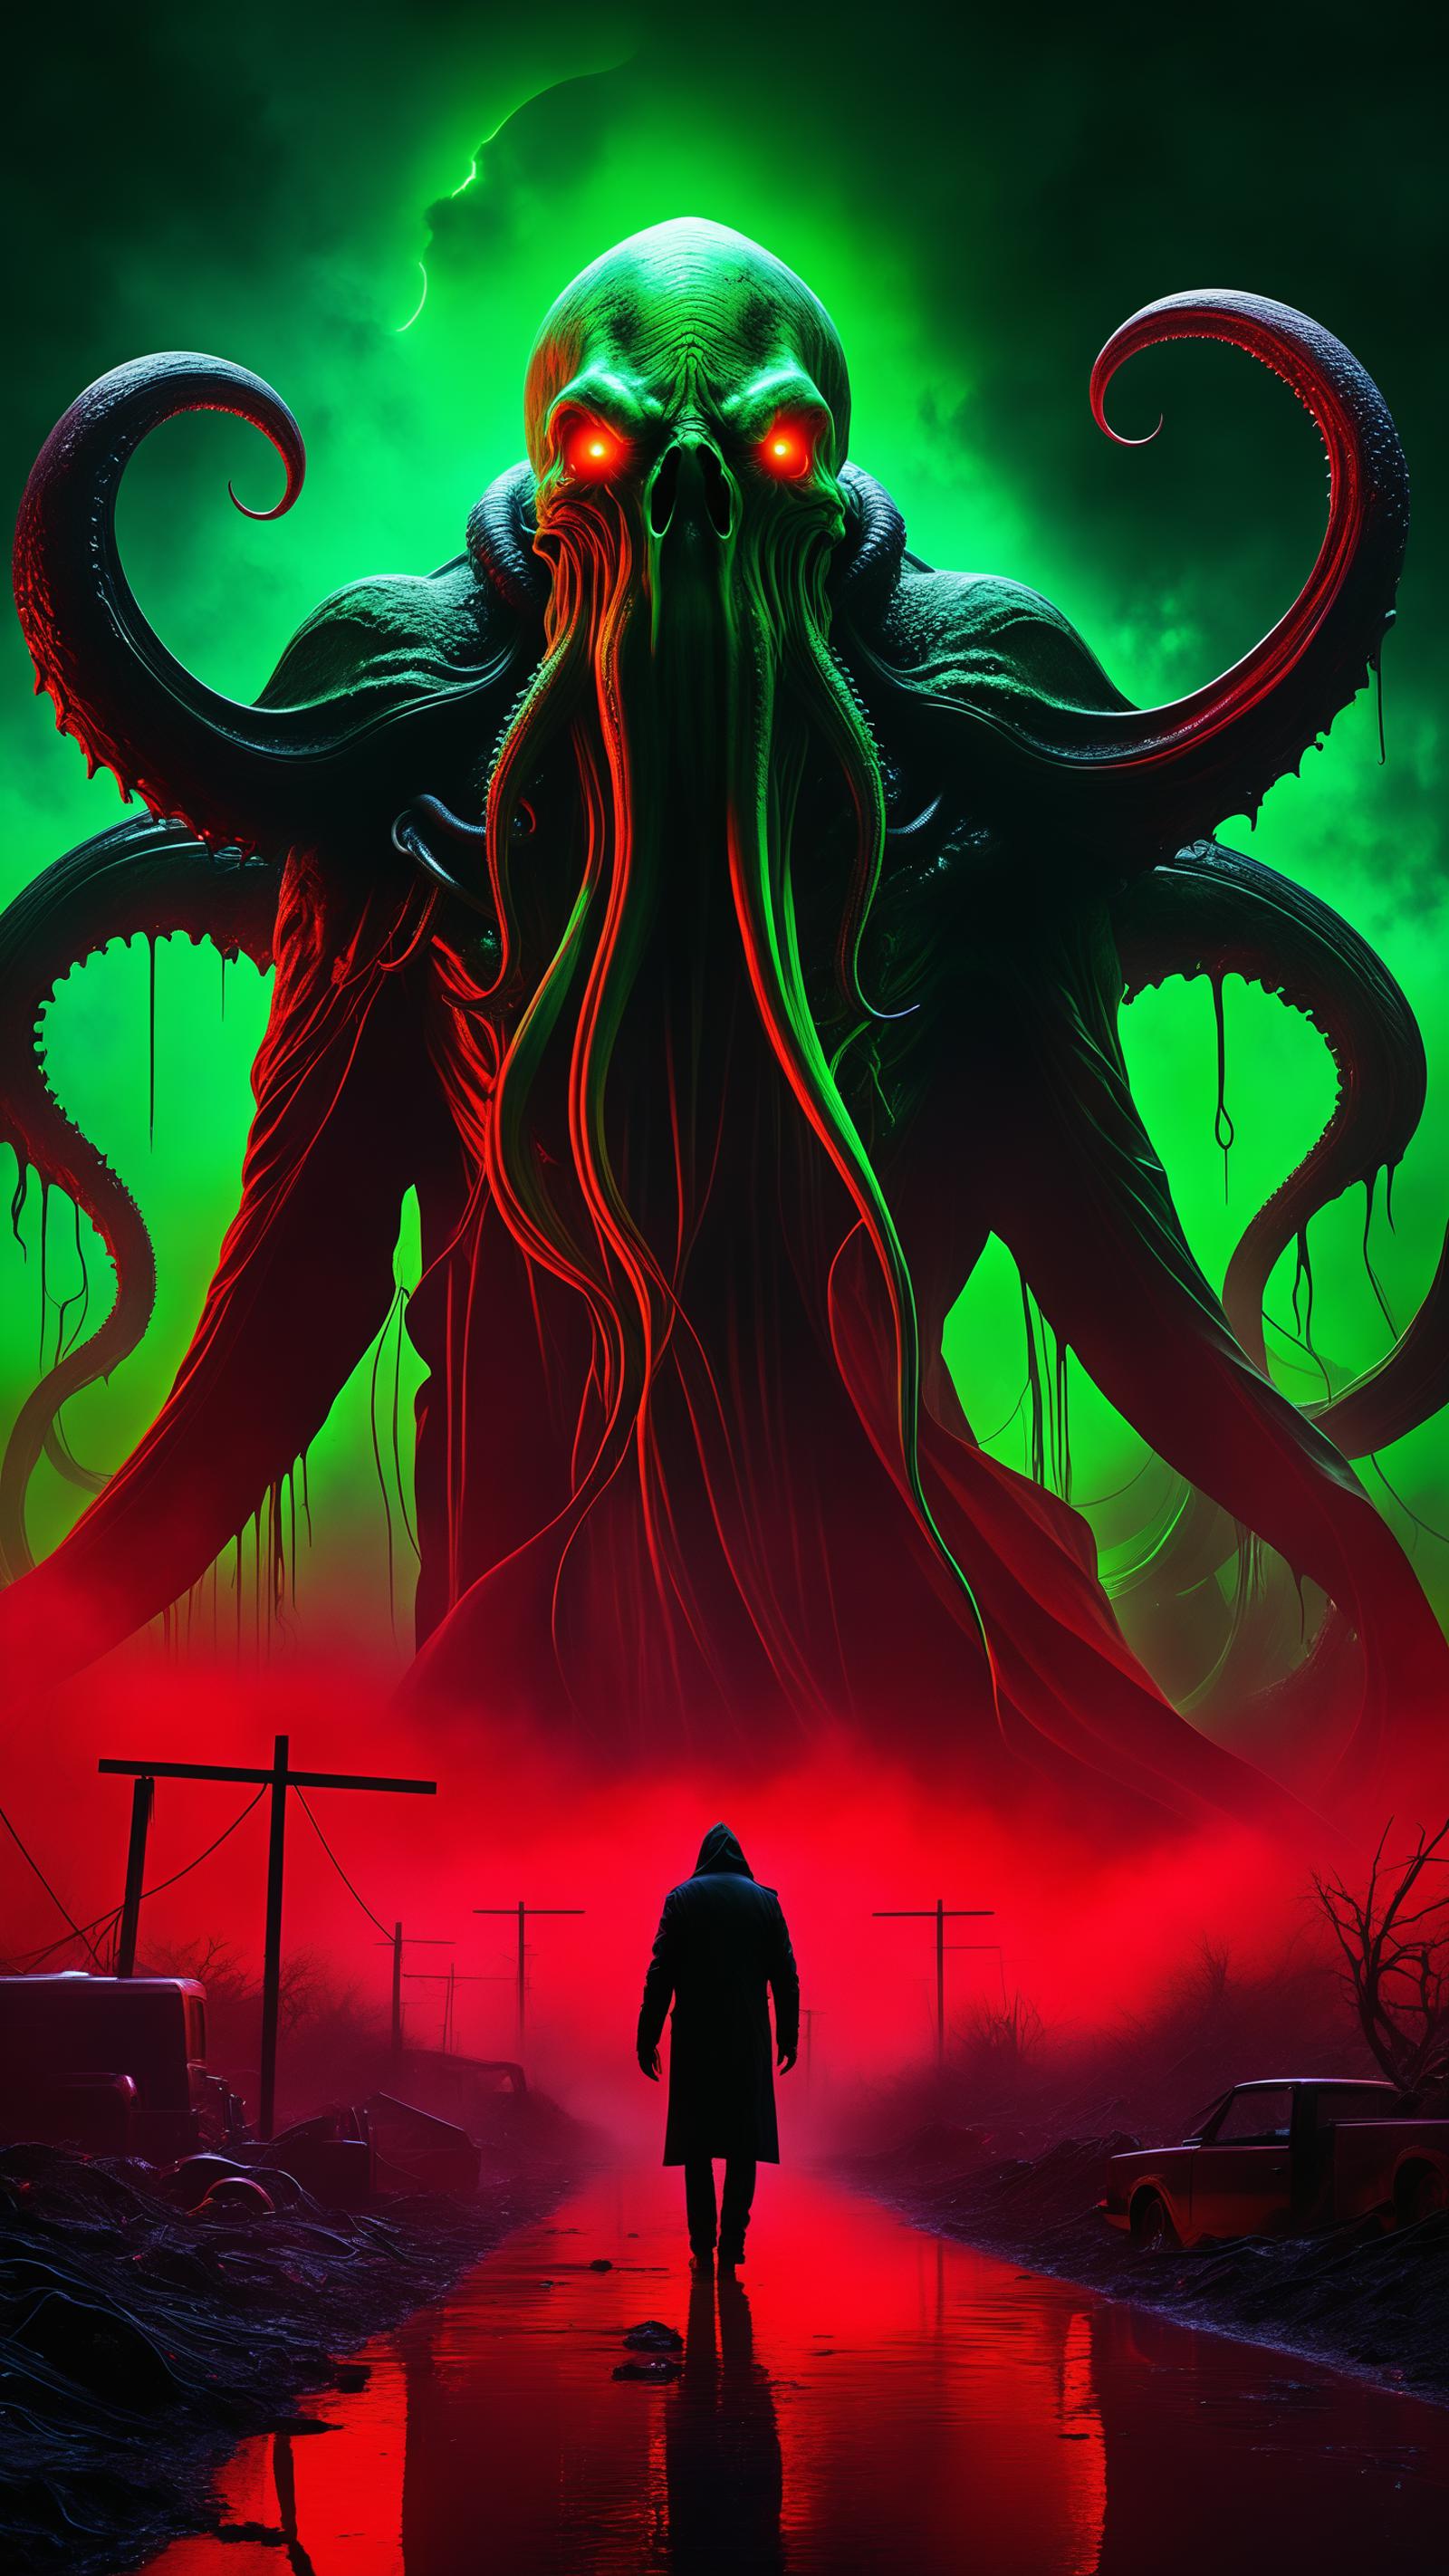 A person standing in front of a monstrous creature in a dark, red and green environment.